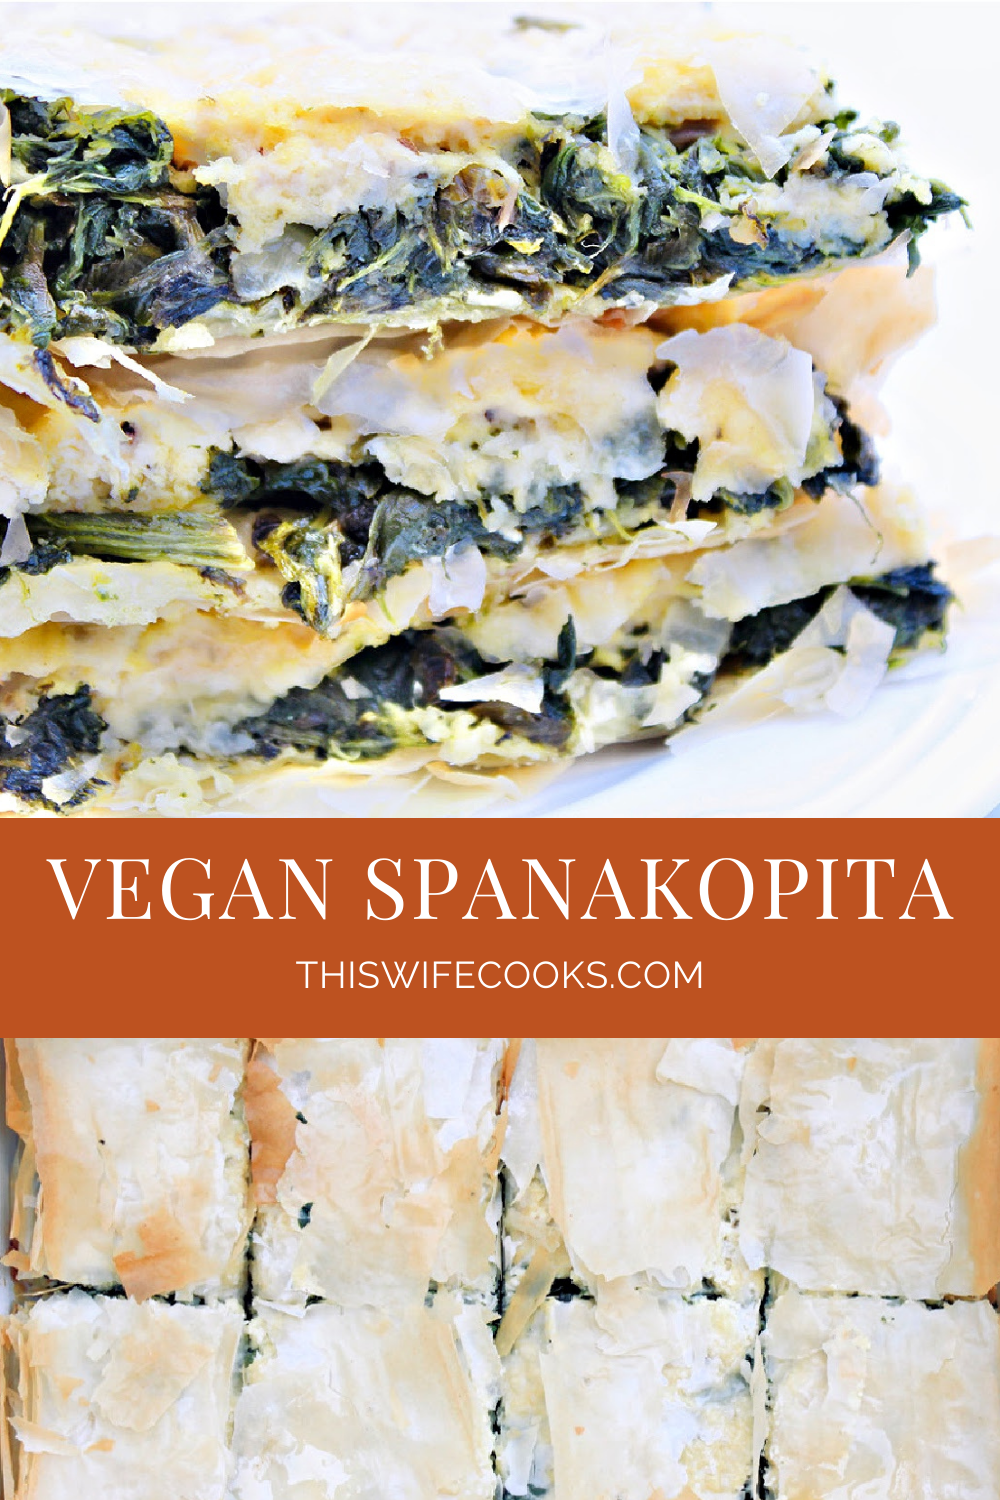 Vegan Spanakopita ~ A savory and aromatic Greek-style main dish or hearty appetizer packed with spinach and vegan feta cheese between layers of crispy phyllo dough. via @thiswifecooks